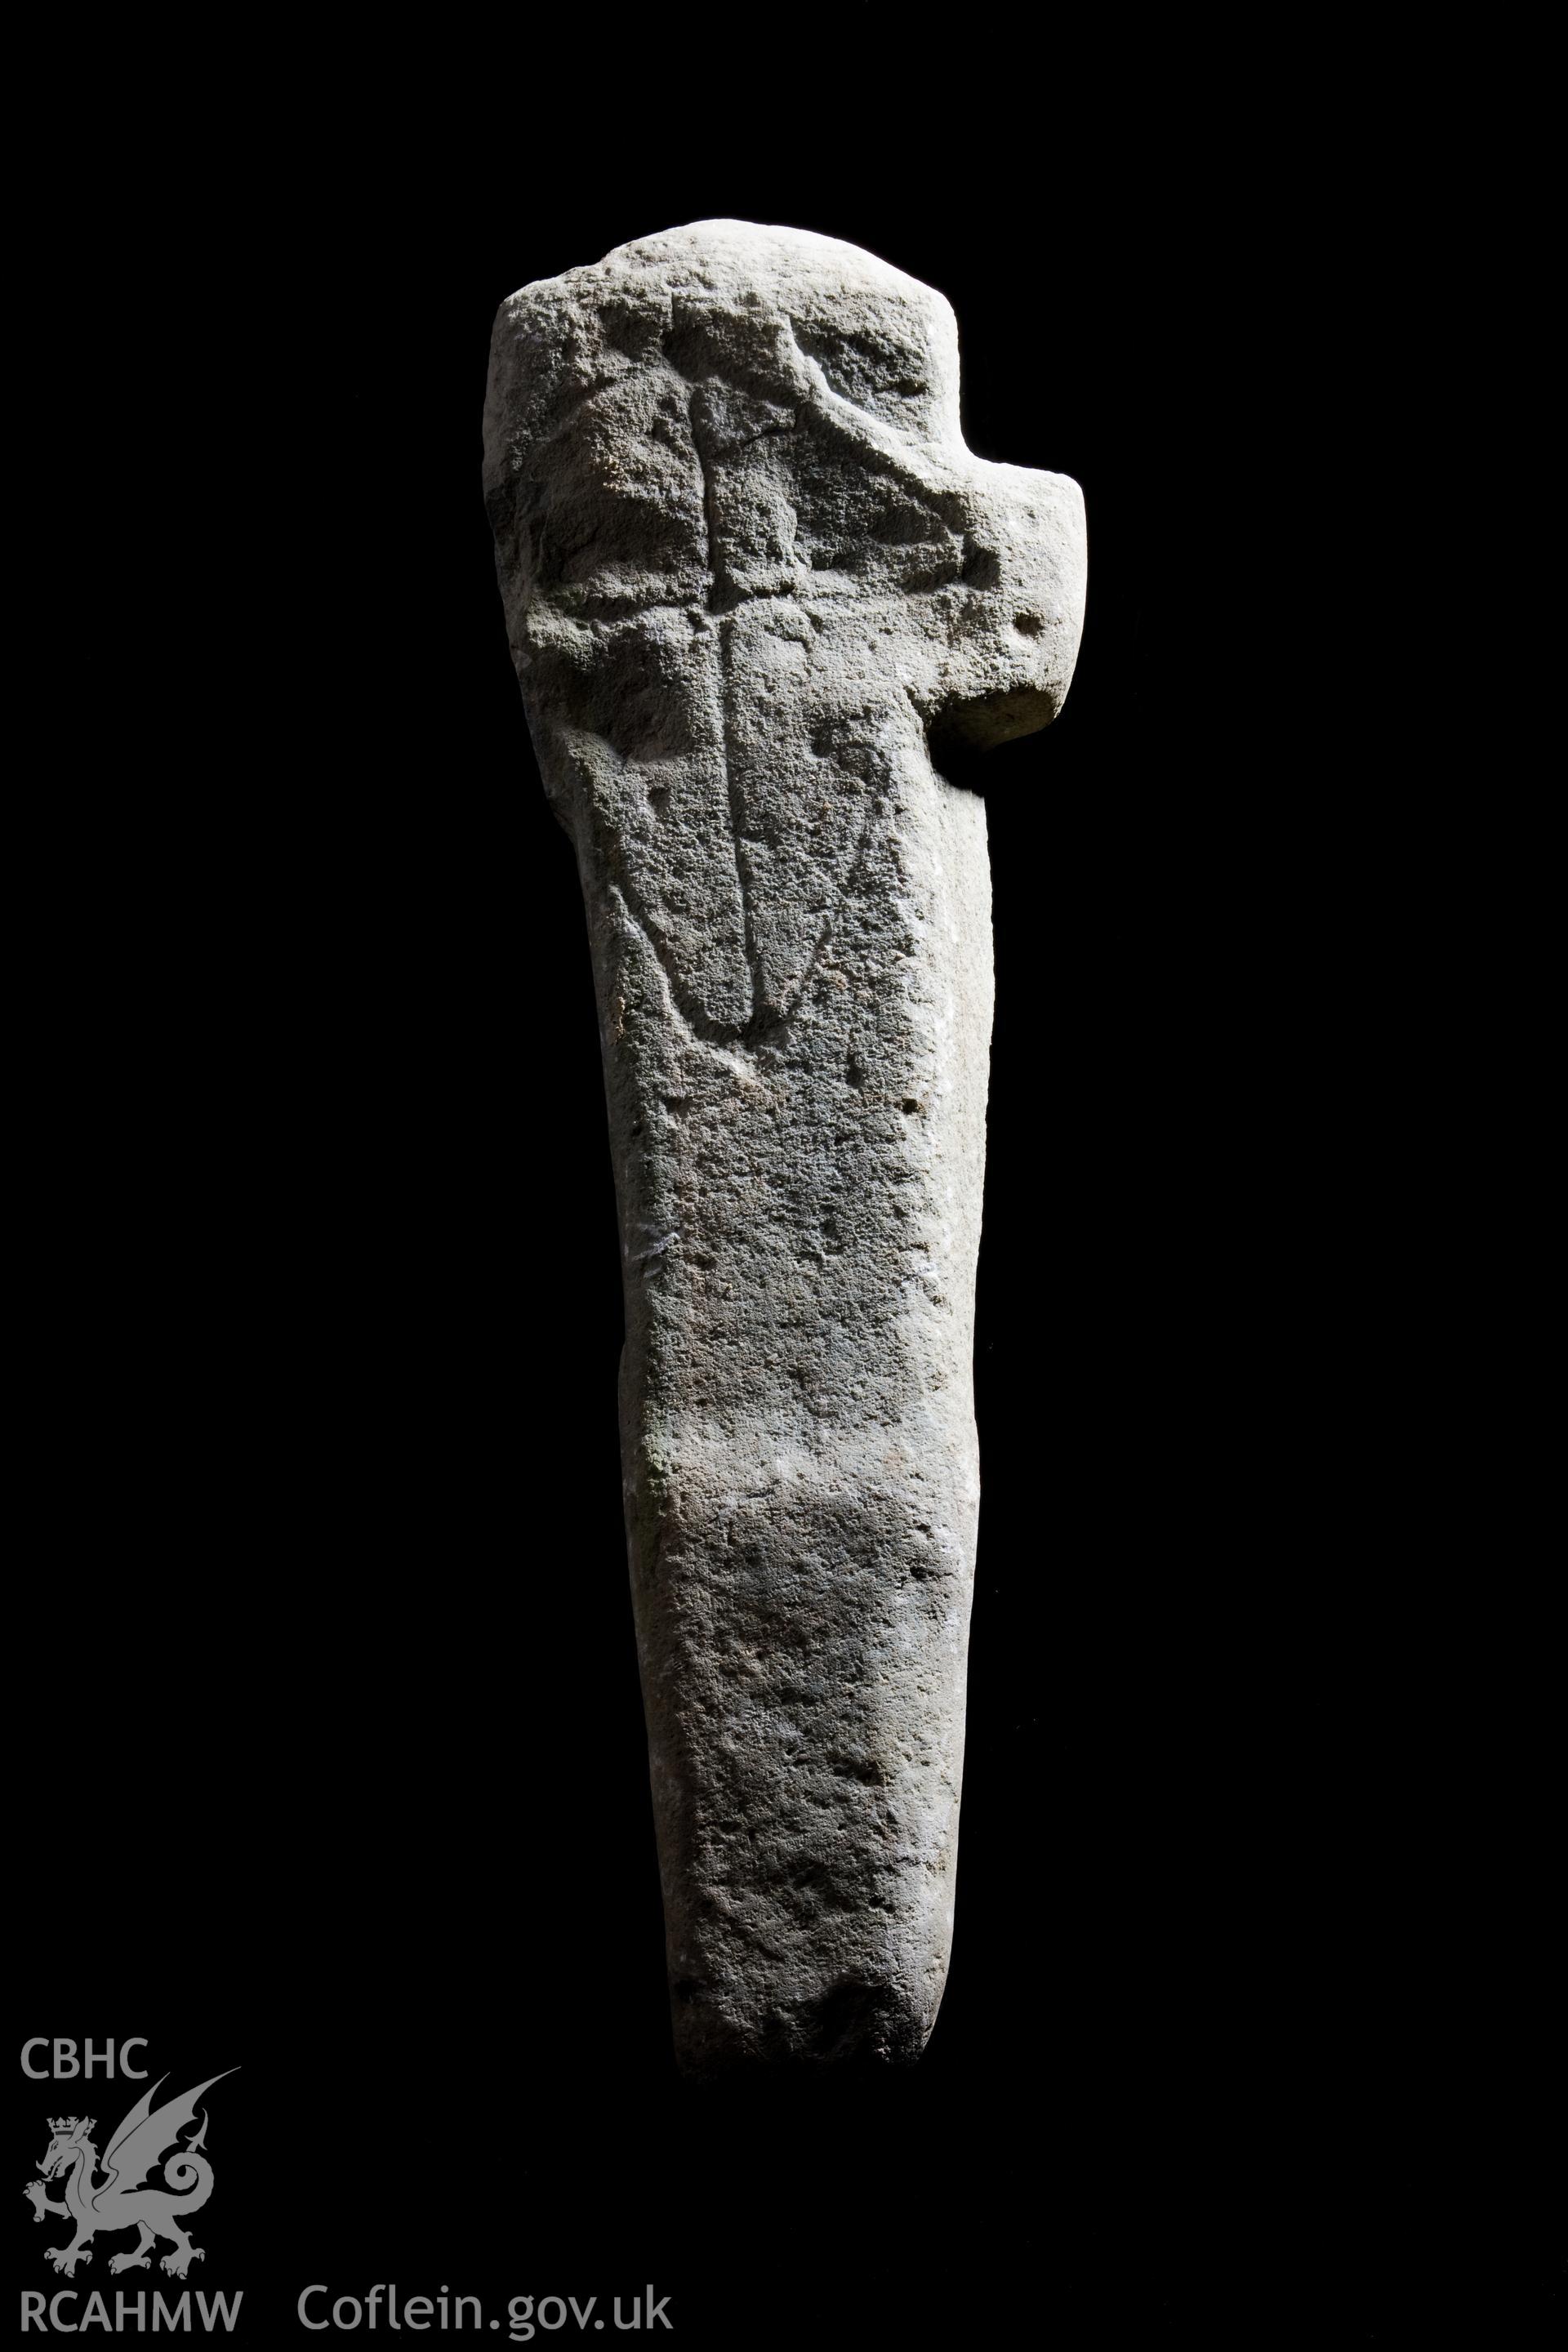 Cross carved stone found in graveyard. (2008)